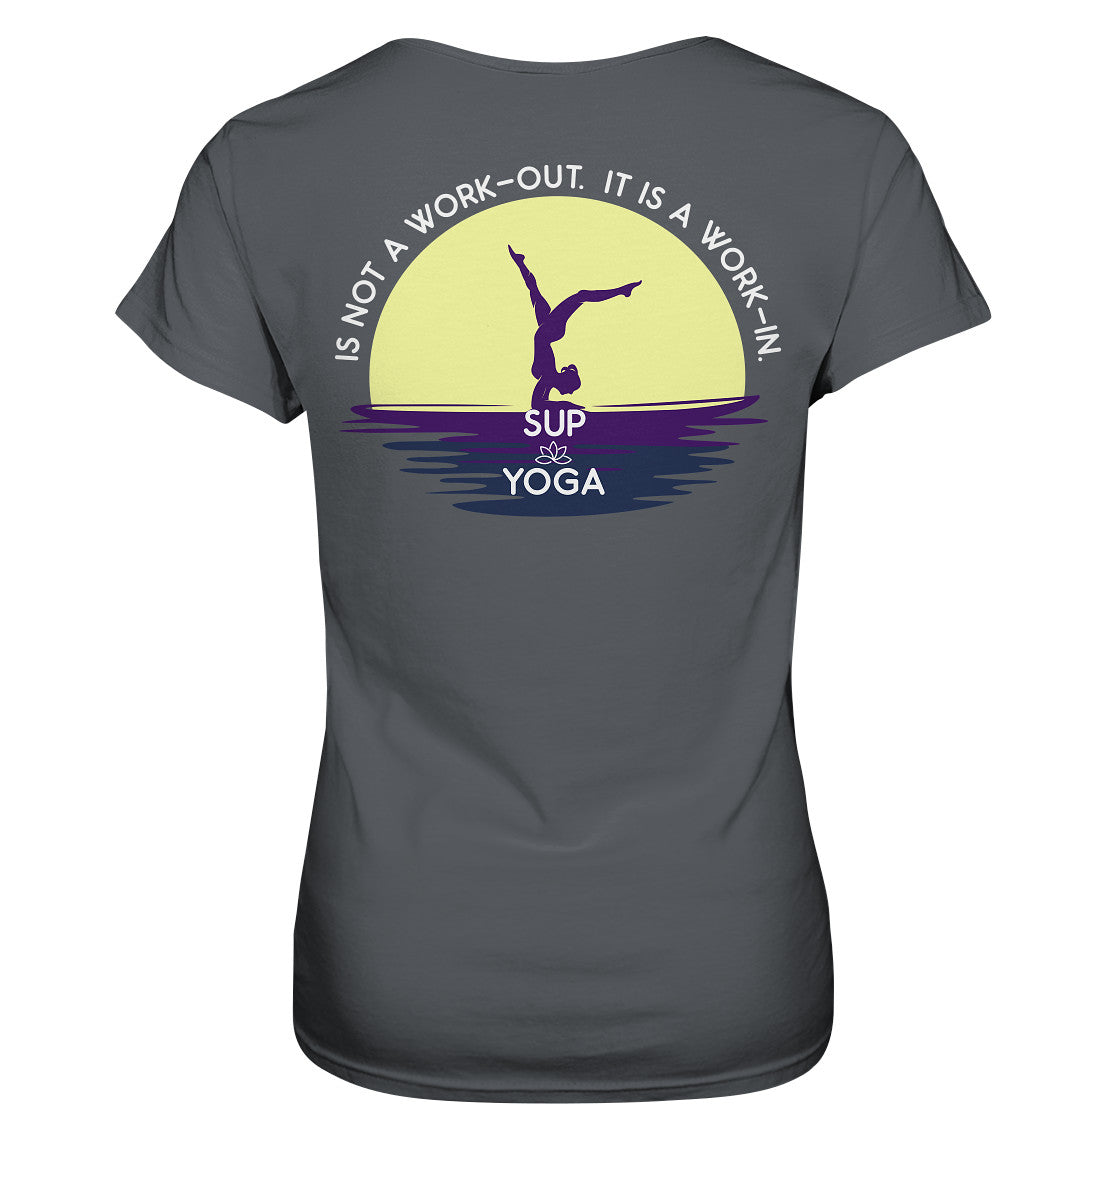 SUP YOGA IS NOT A WORK-OUT.  IT IS A WORK-IN.  - Ladies Premium Shirt